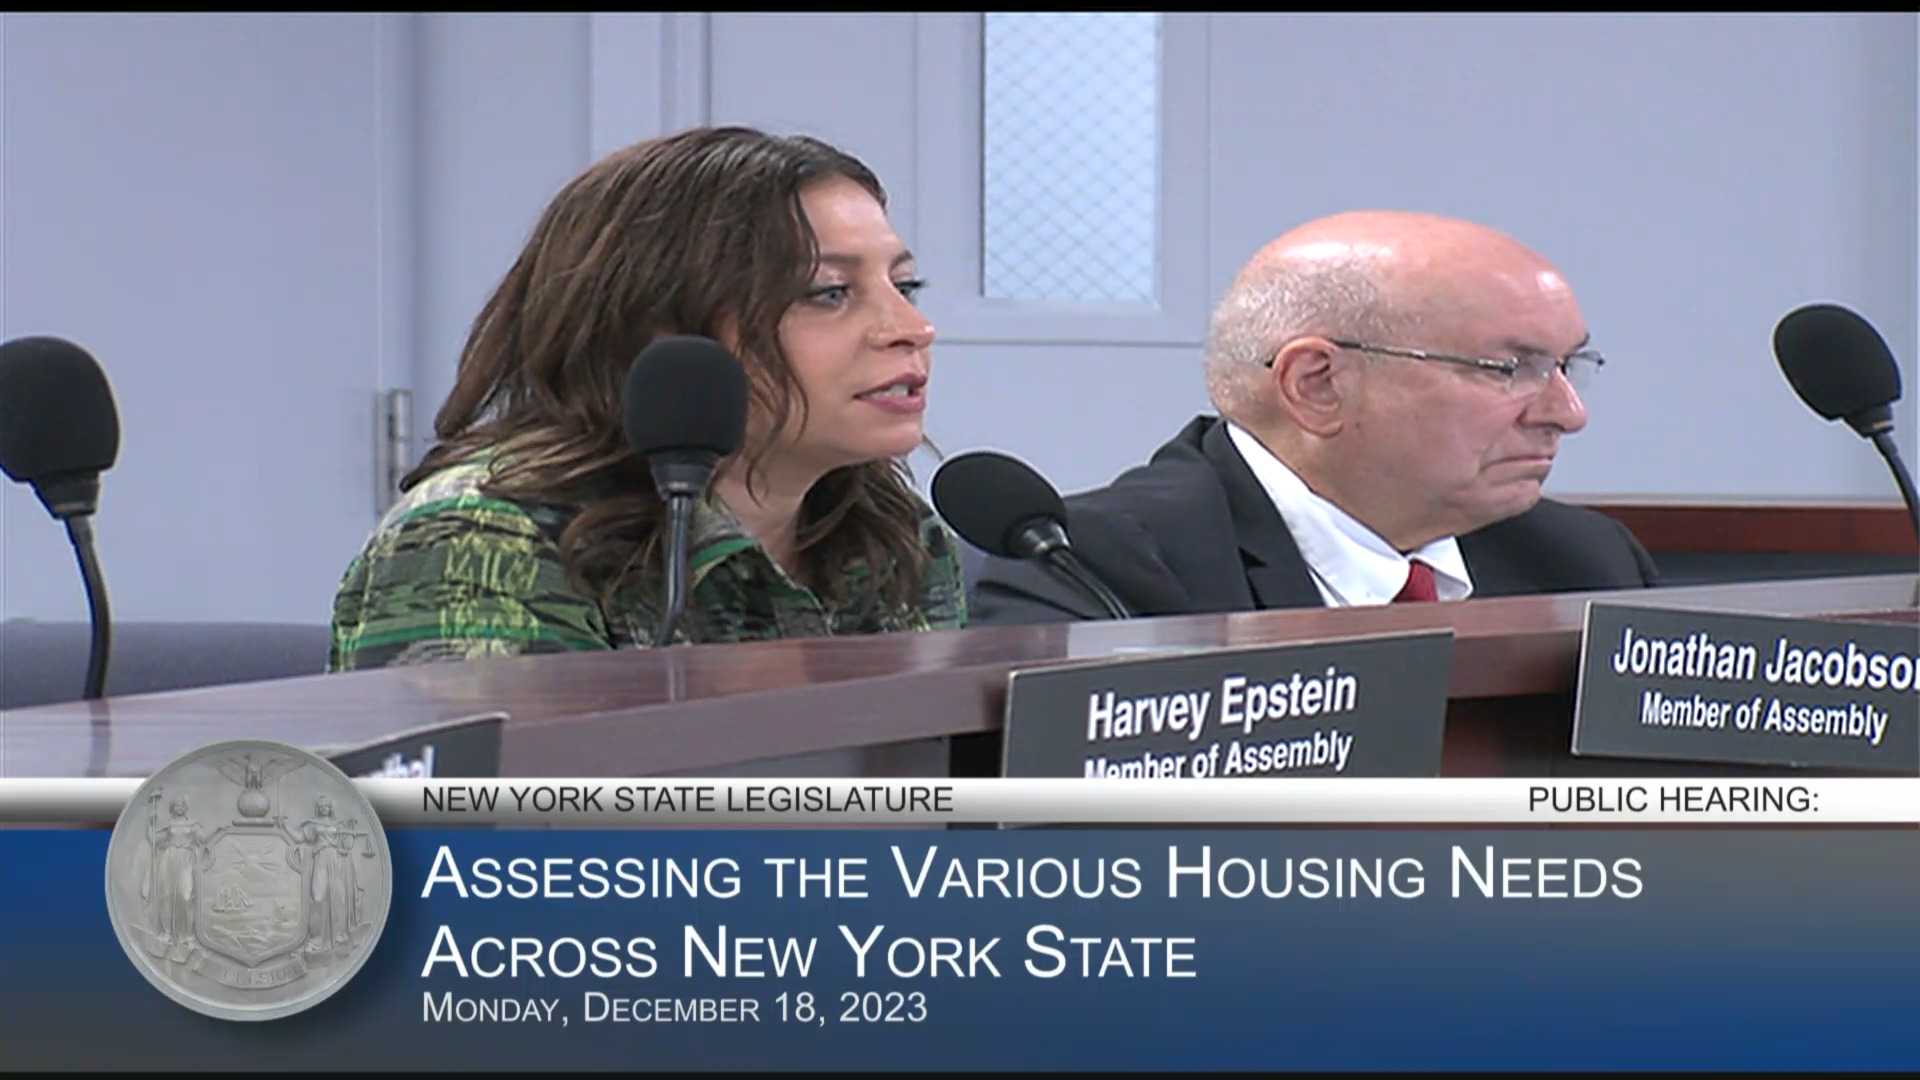 NYC Housing Officials Testify During a Public Hearing to Assess the Various Housing Needs Across NYS